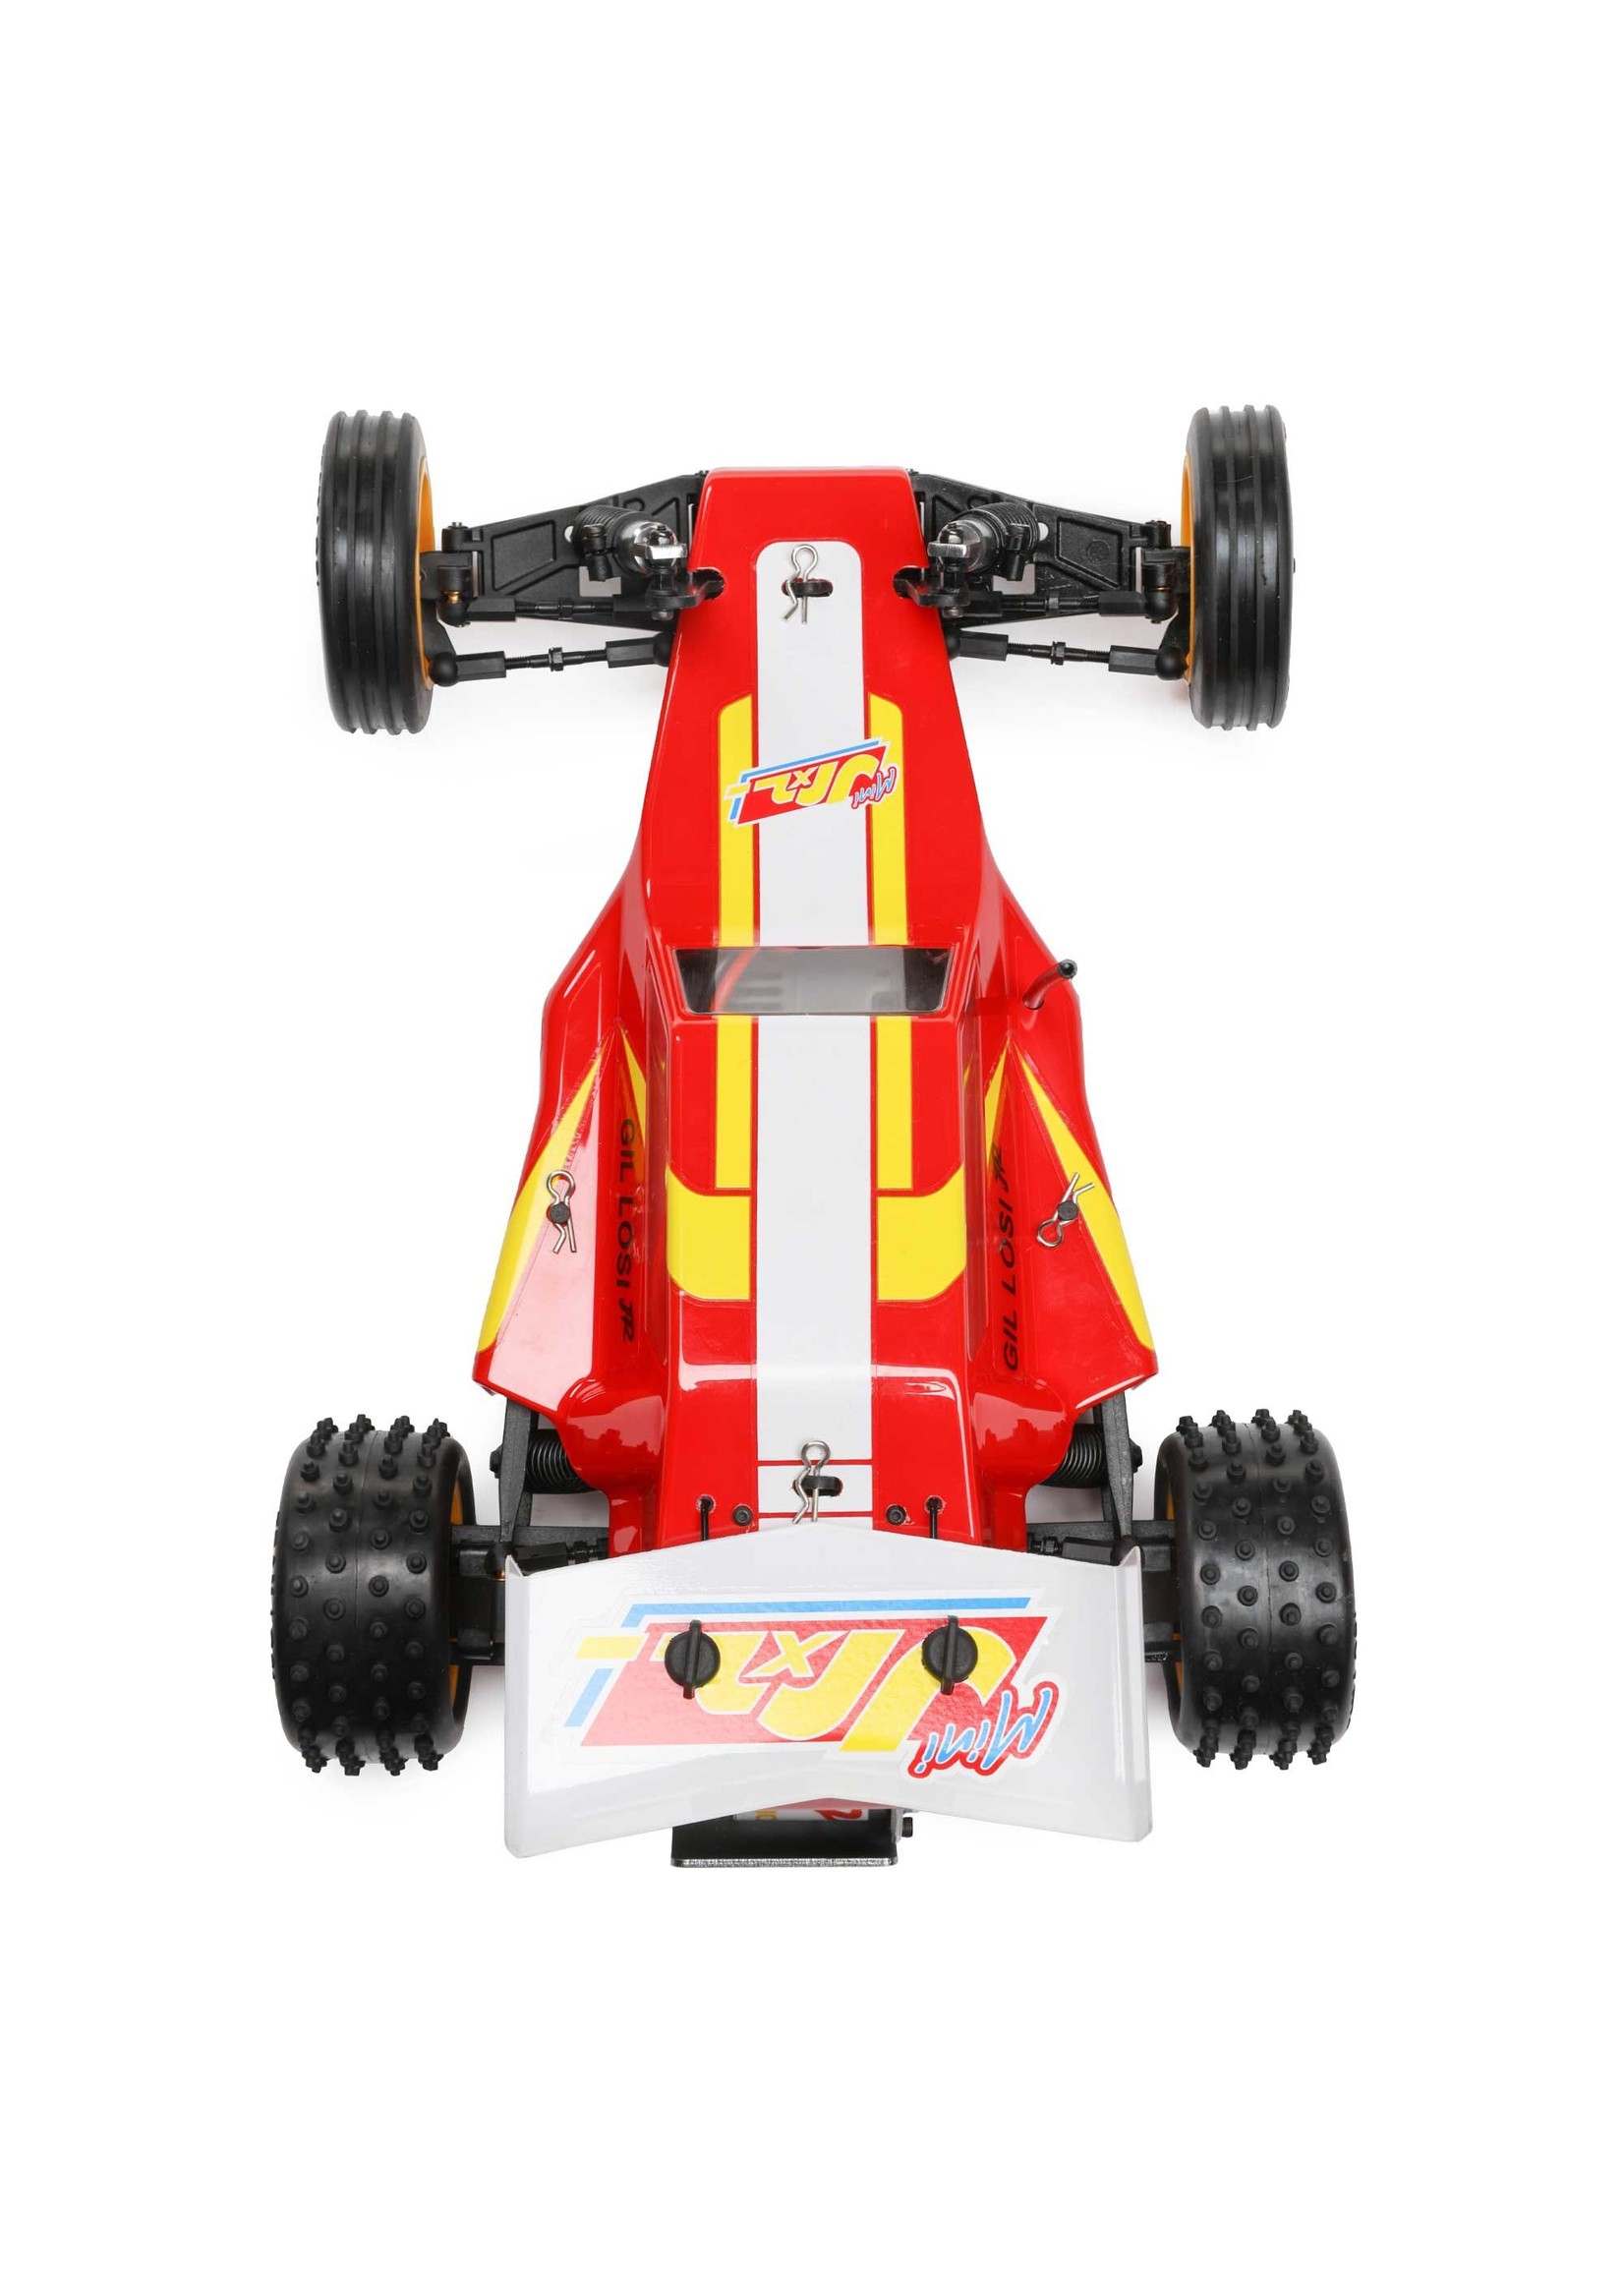 Losi 1/16 Mini JRX2 2WD Buggy Brushed RTR - Red